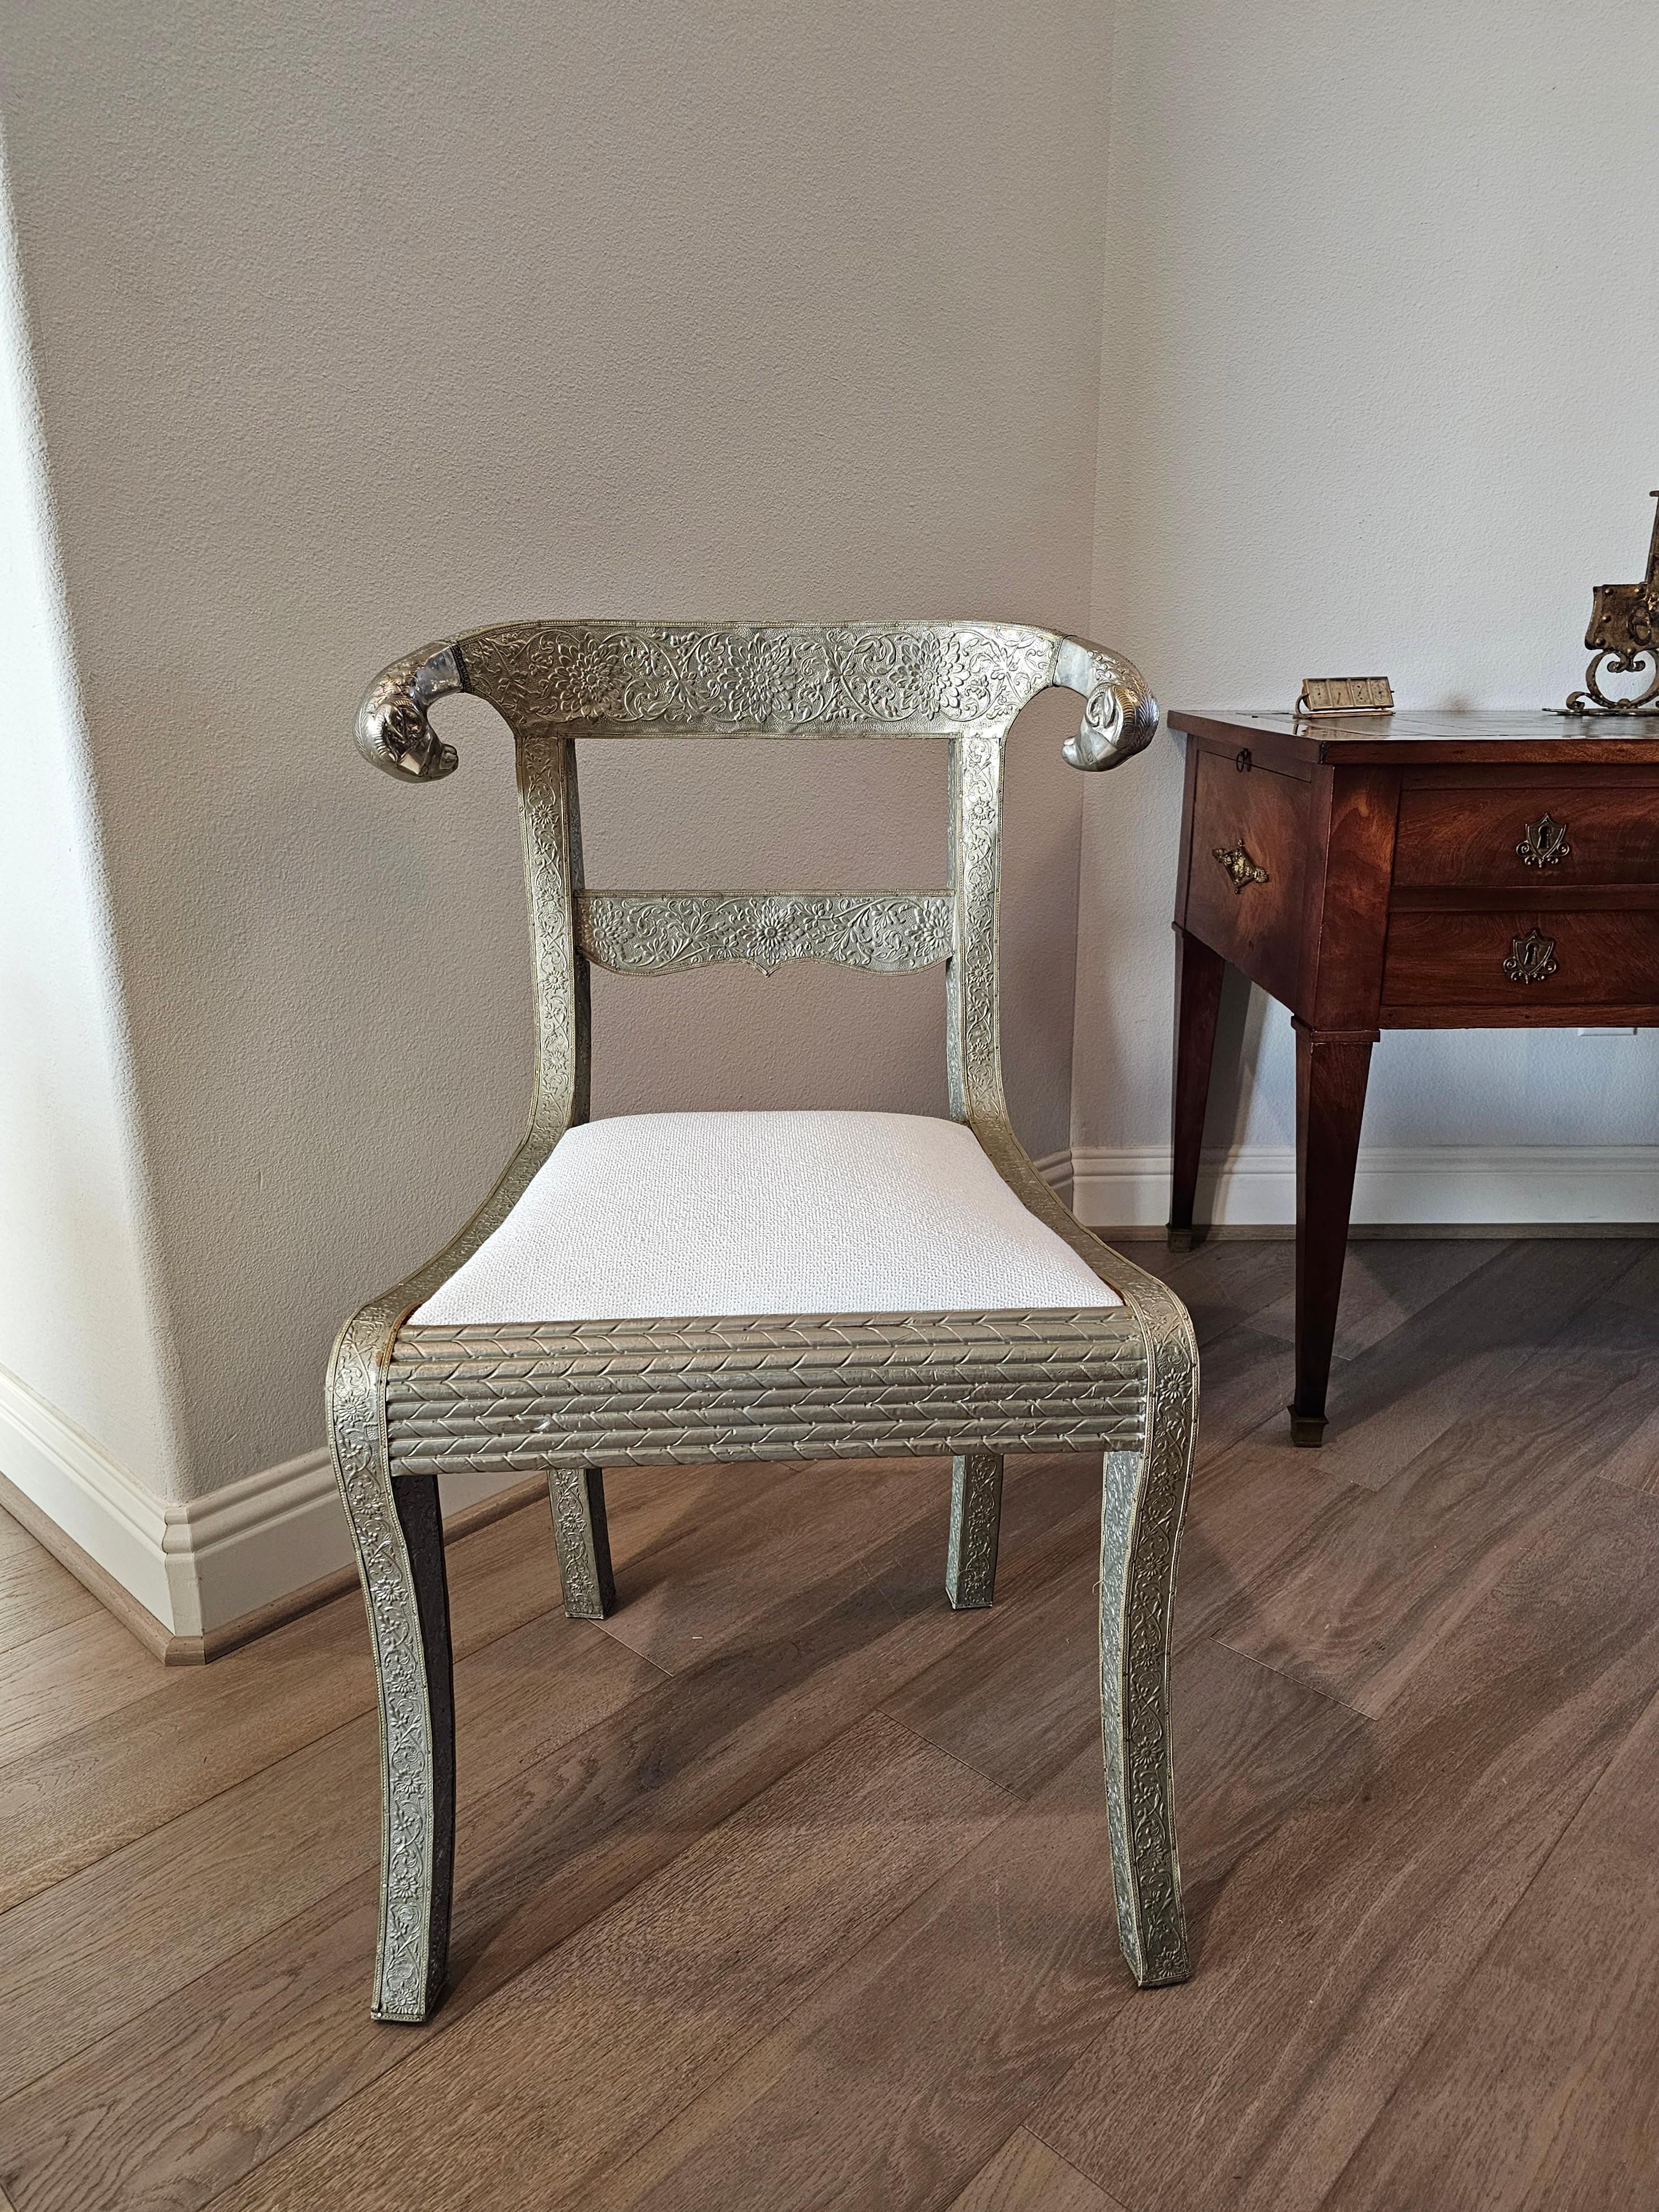 Anglo-Indian Silvered Metal-Clad Chair For Sale 7